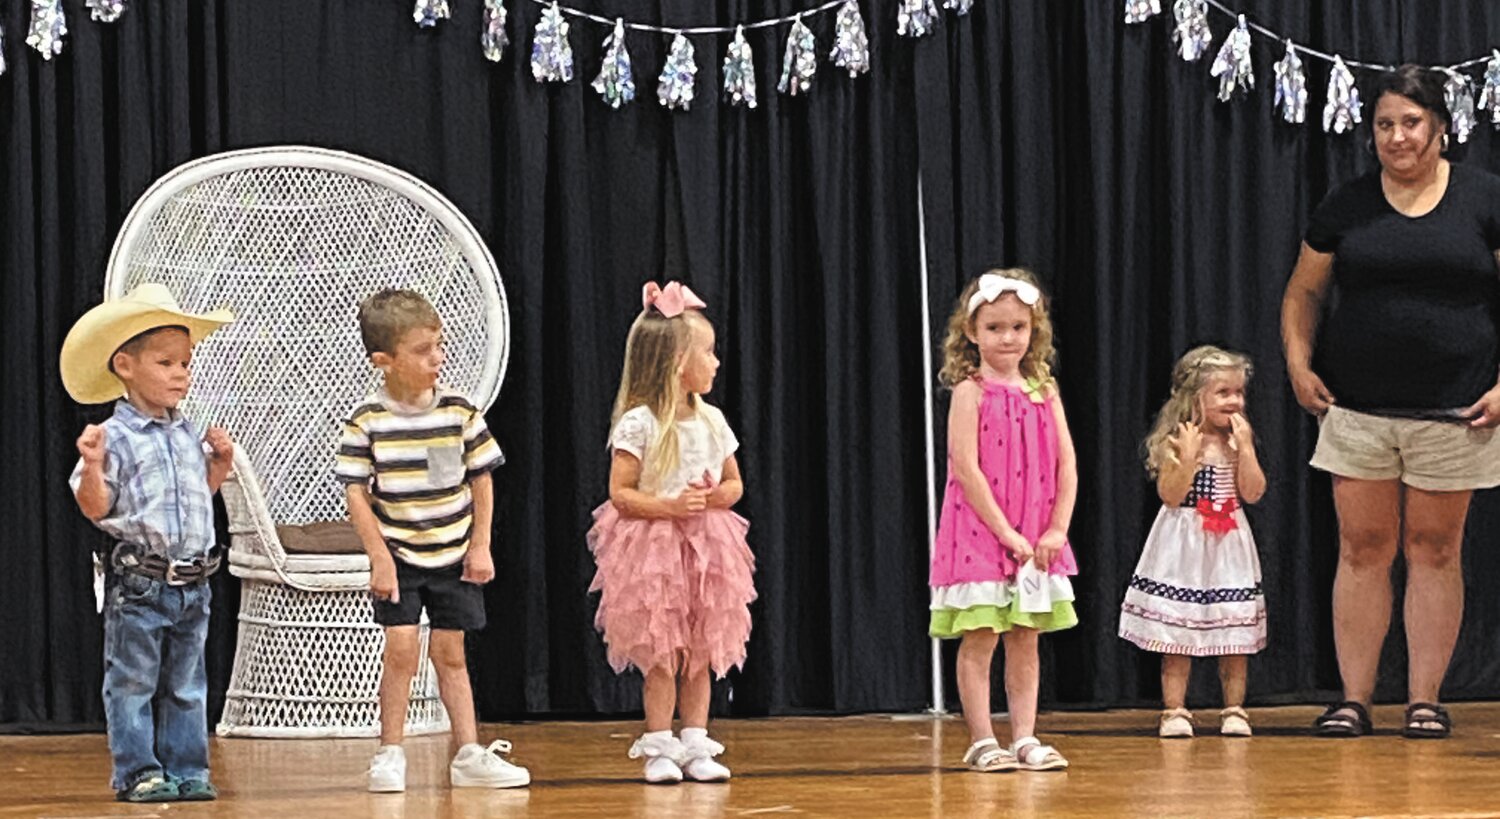 Contestants in the Junior Miss and Mister Division, ages 3-4, line the stage.